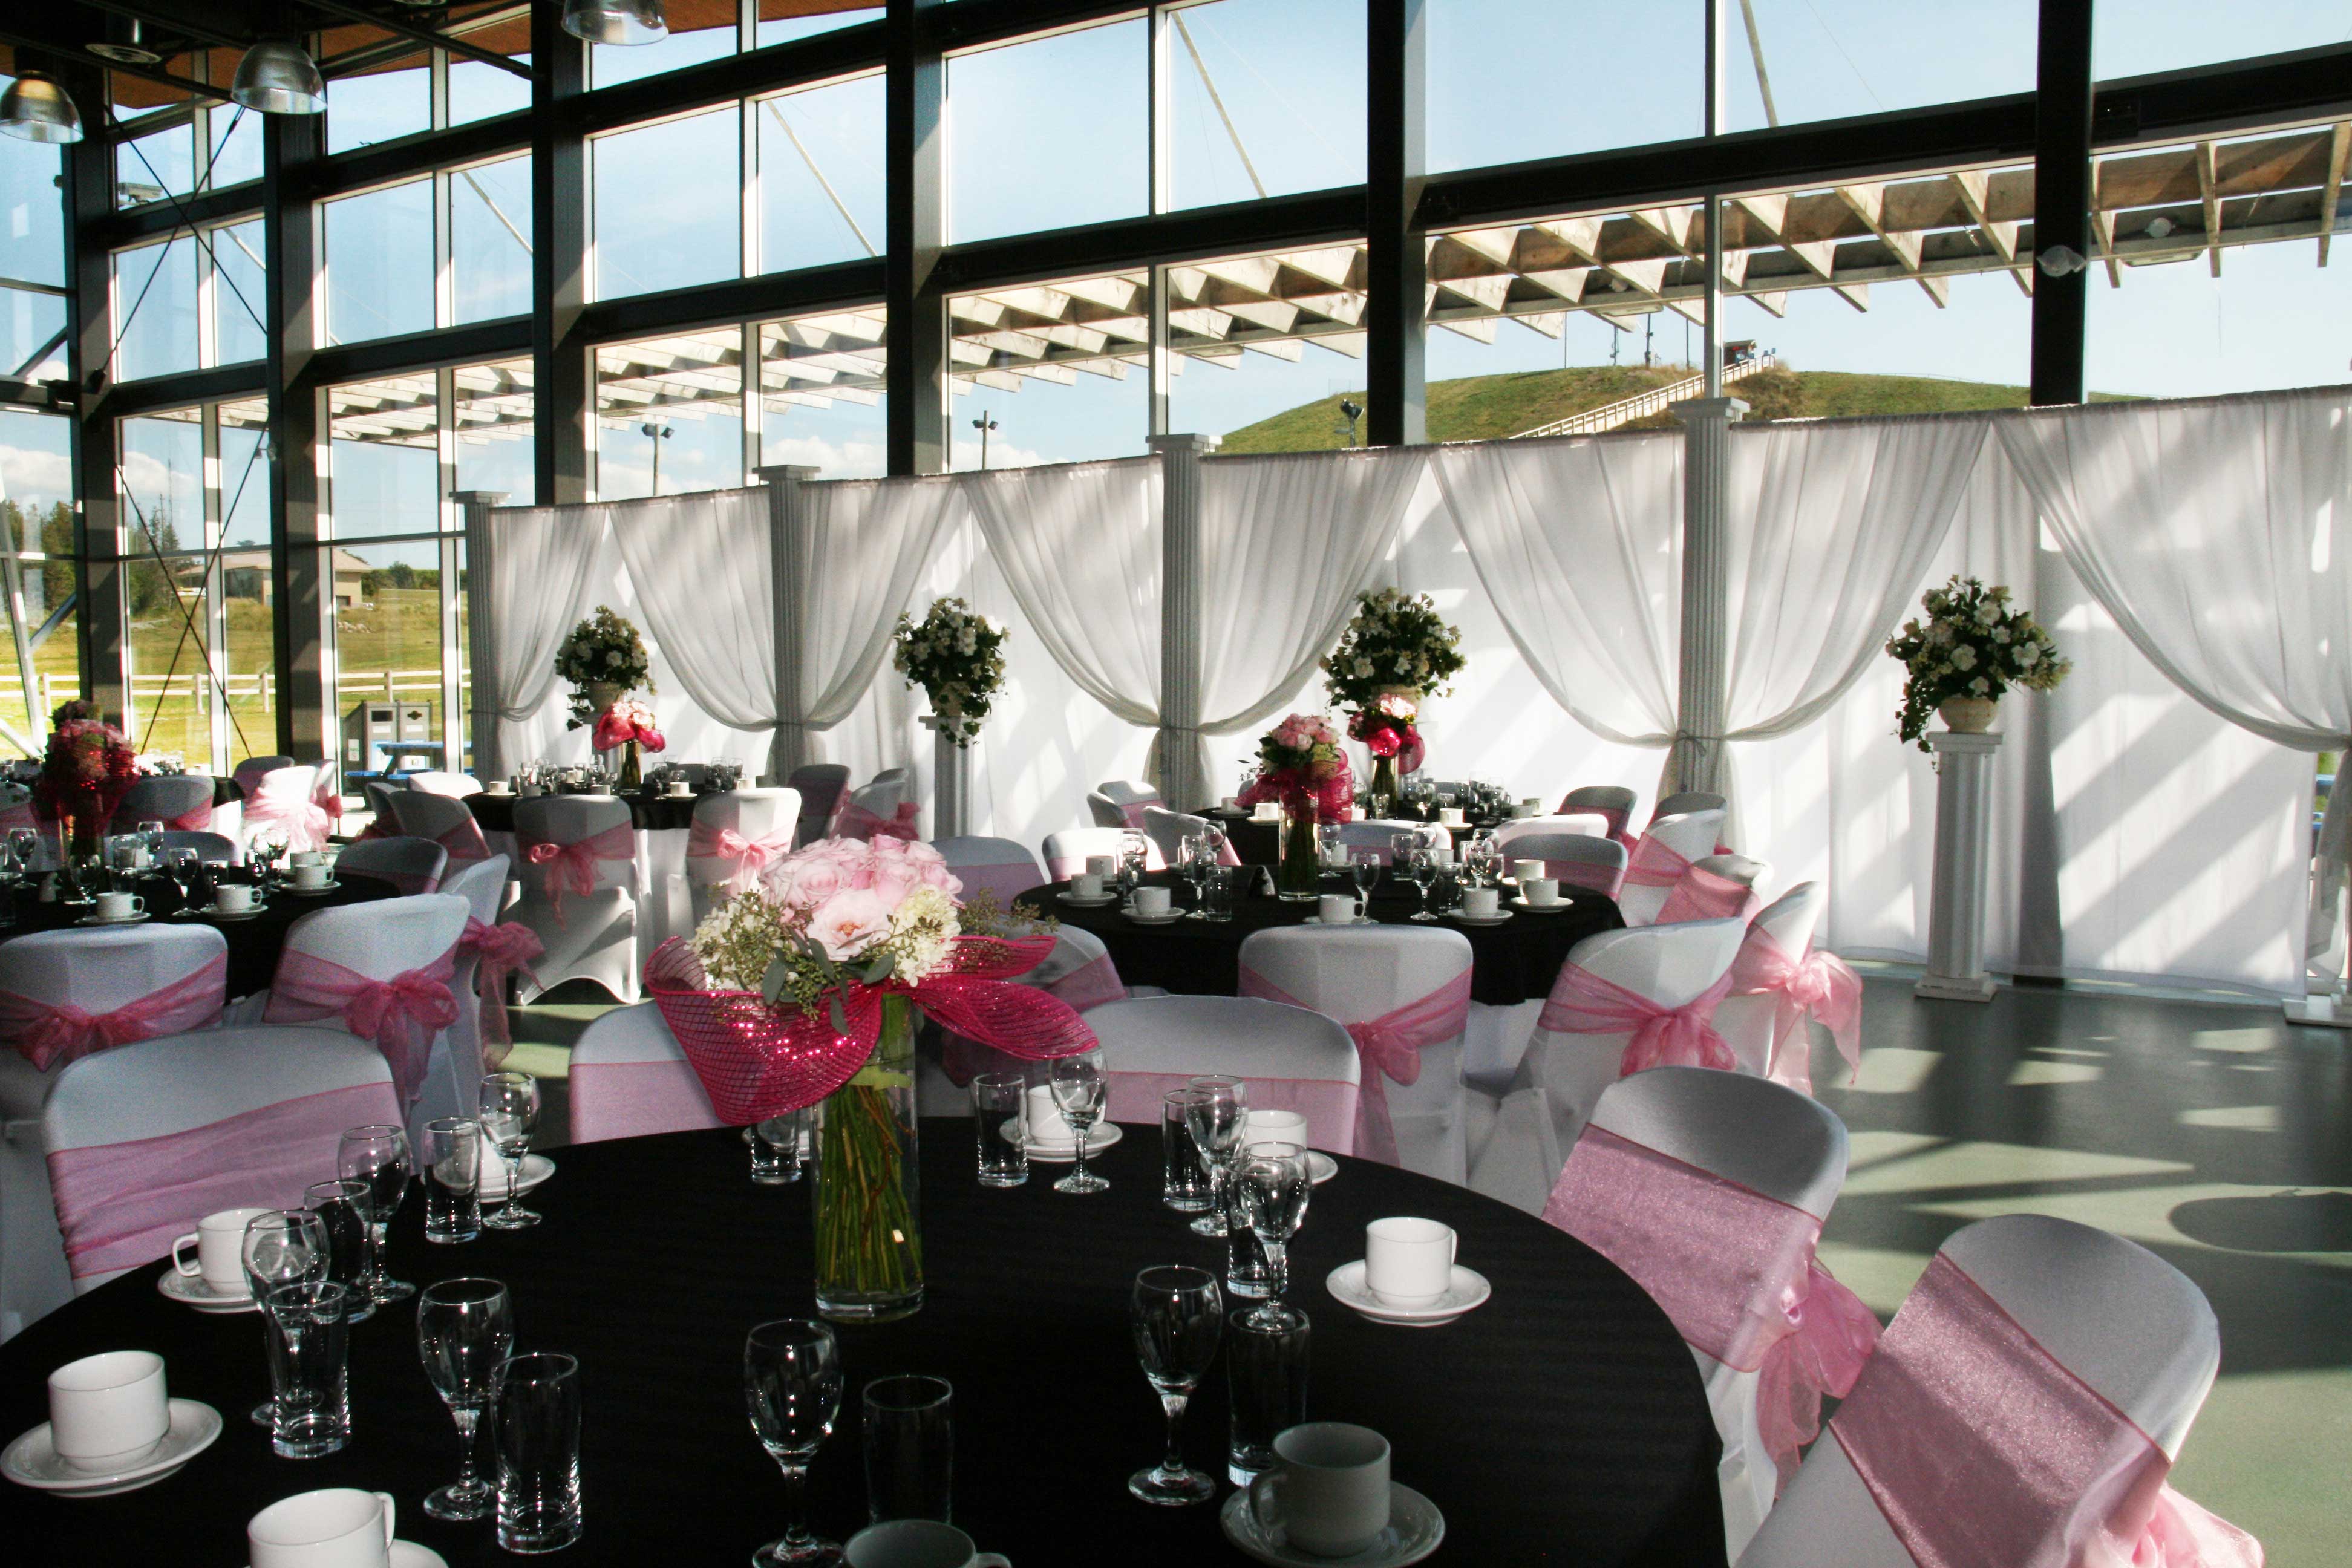 Chalet interior, decorated for a wedding